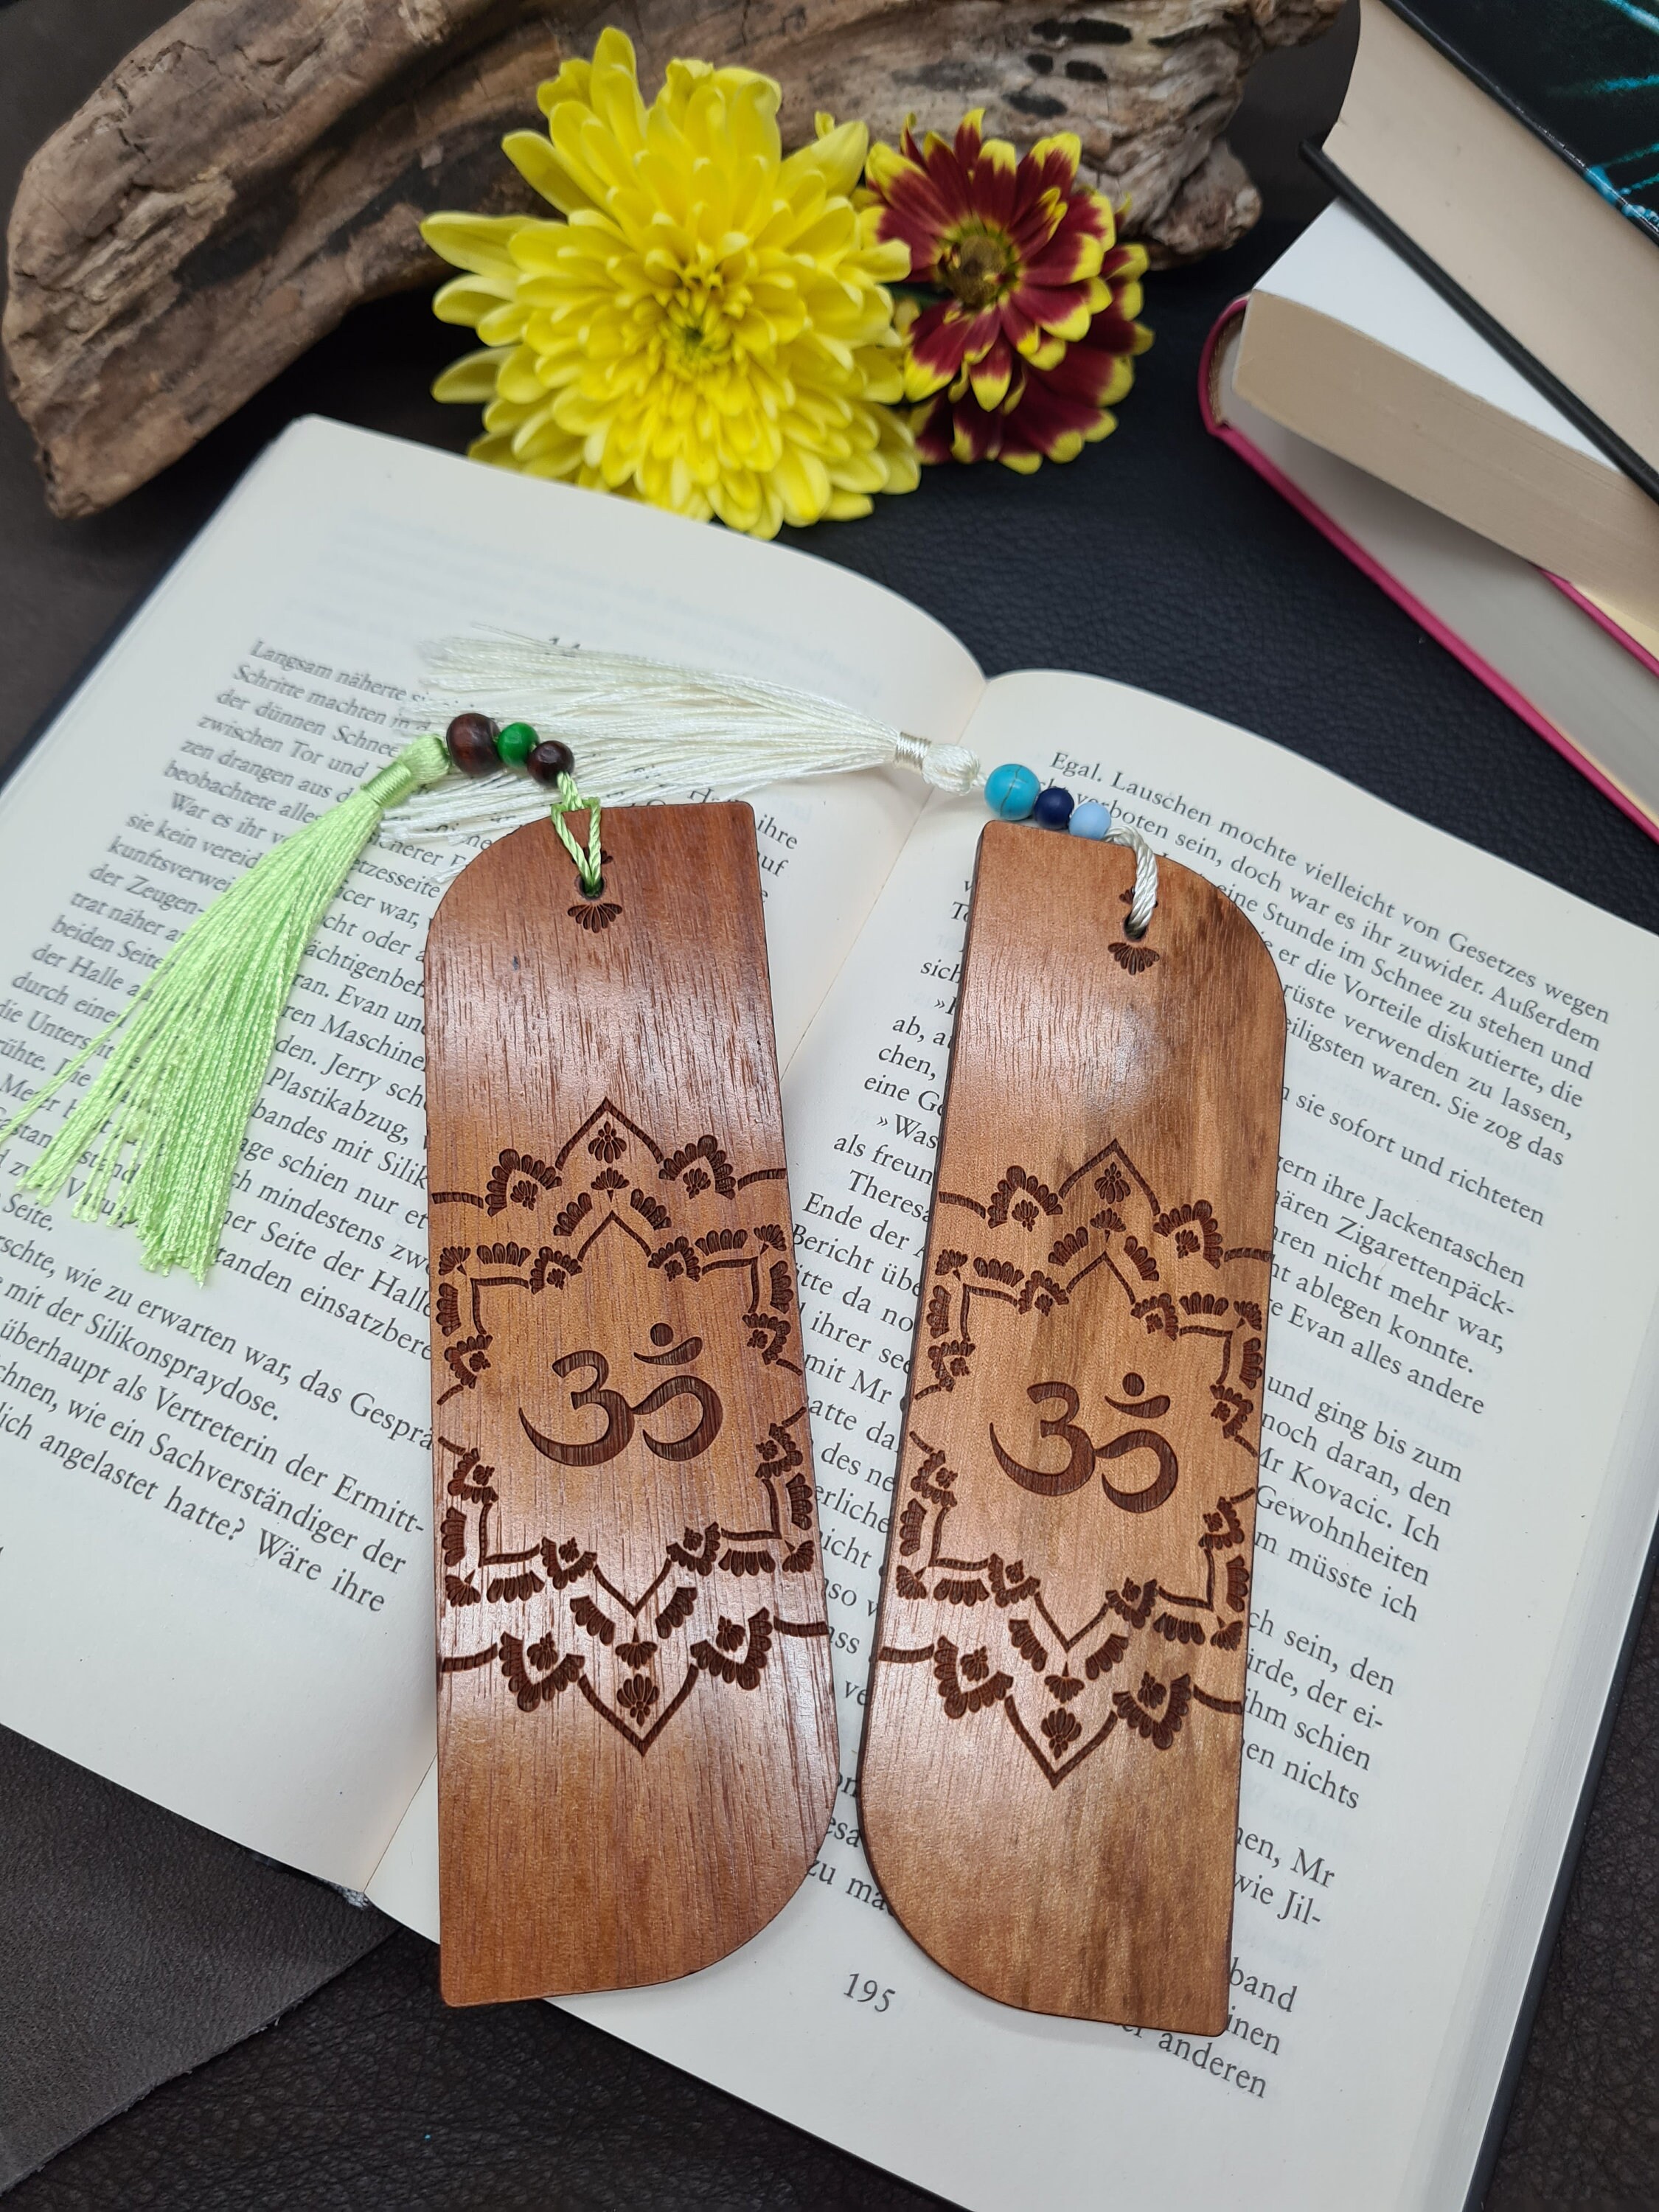 3 X 14.5 Cm 1.18 X 5.71 Blank Wooden Bookmarks , Plywood, Unpainted, Gift  Decoration, Decoupage, Natural Wood 